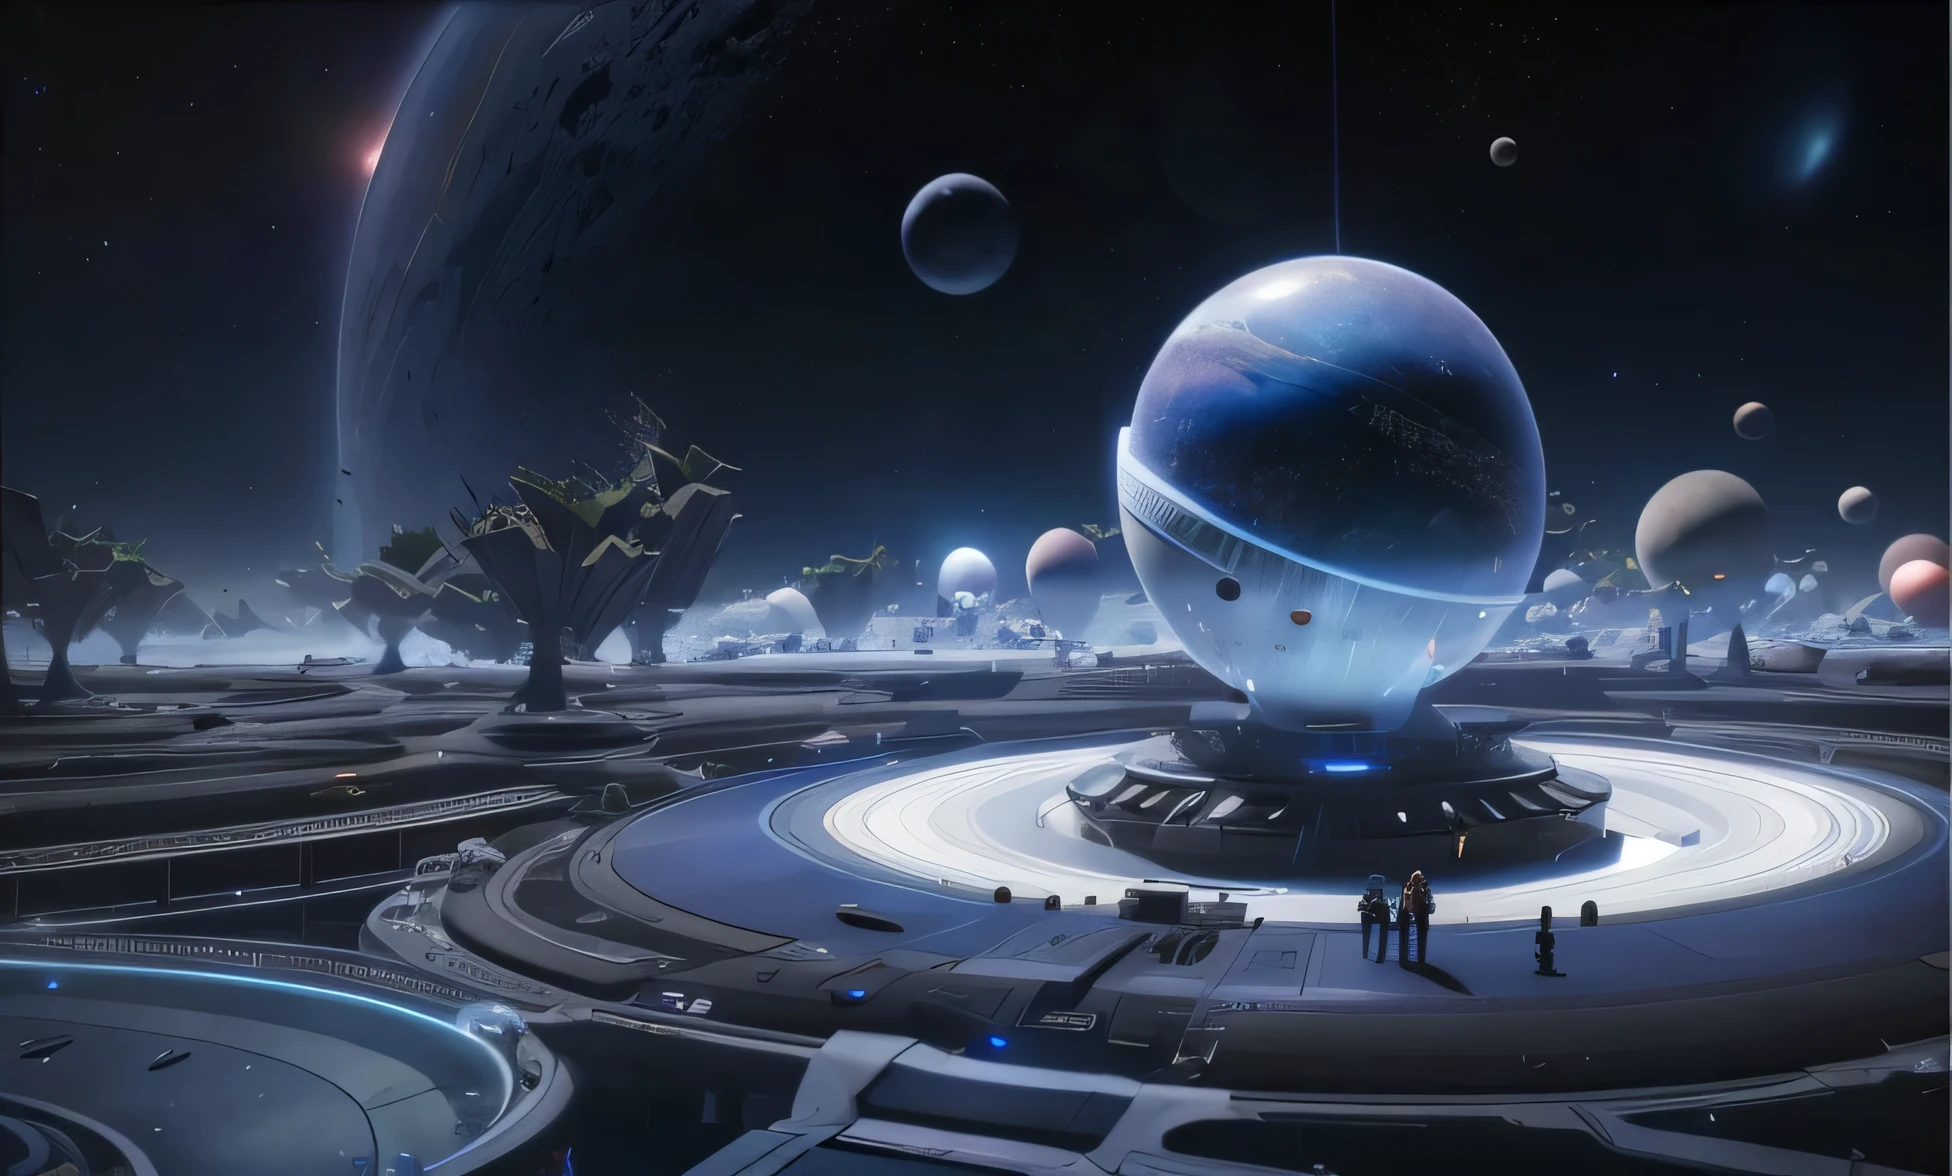 A group of people standing around a large sphere in space, destiny concept art, megastructure in the background, Dyson Sphere, photo of a Dyson Sphere, future spaceport, Dyson Sphere in space, Dyson Sphere program, futuristic setting, Dyson Sphere program pink planet, destiny art, planetary city, futuristic base, destiny 2, destiny, Huge future temple city